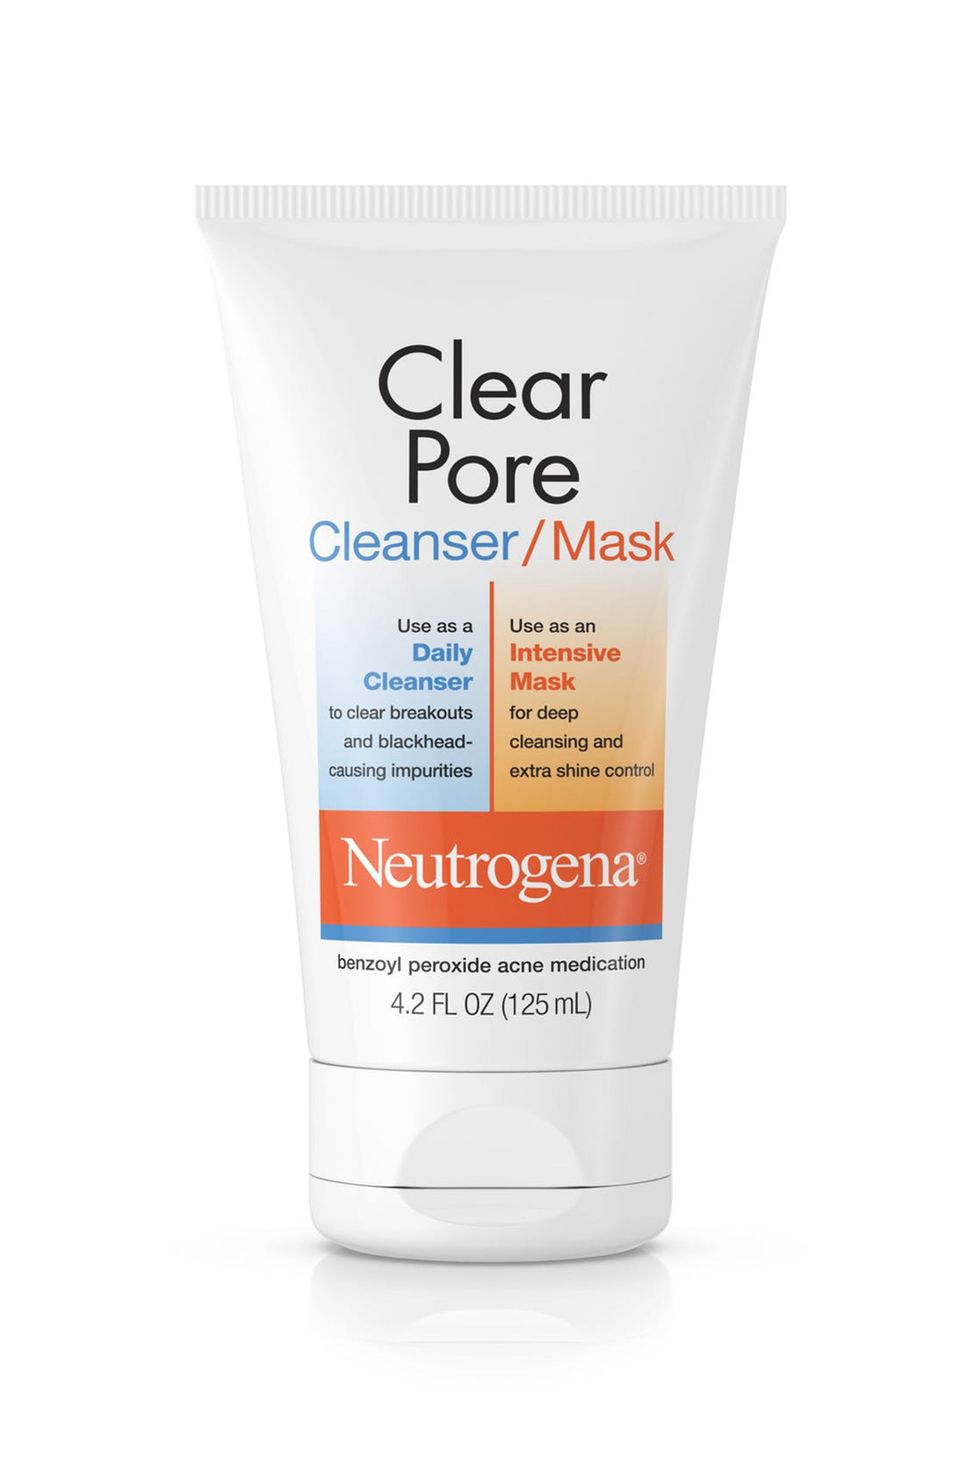 Clear Pore Facial Cleanser and Mask